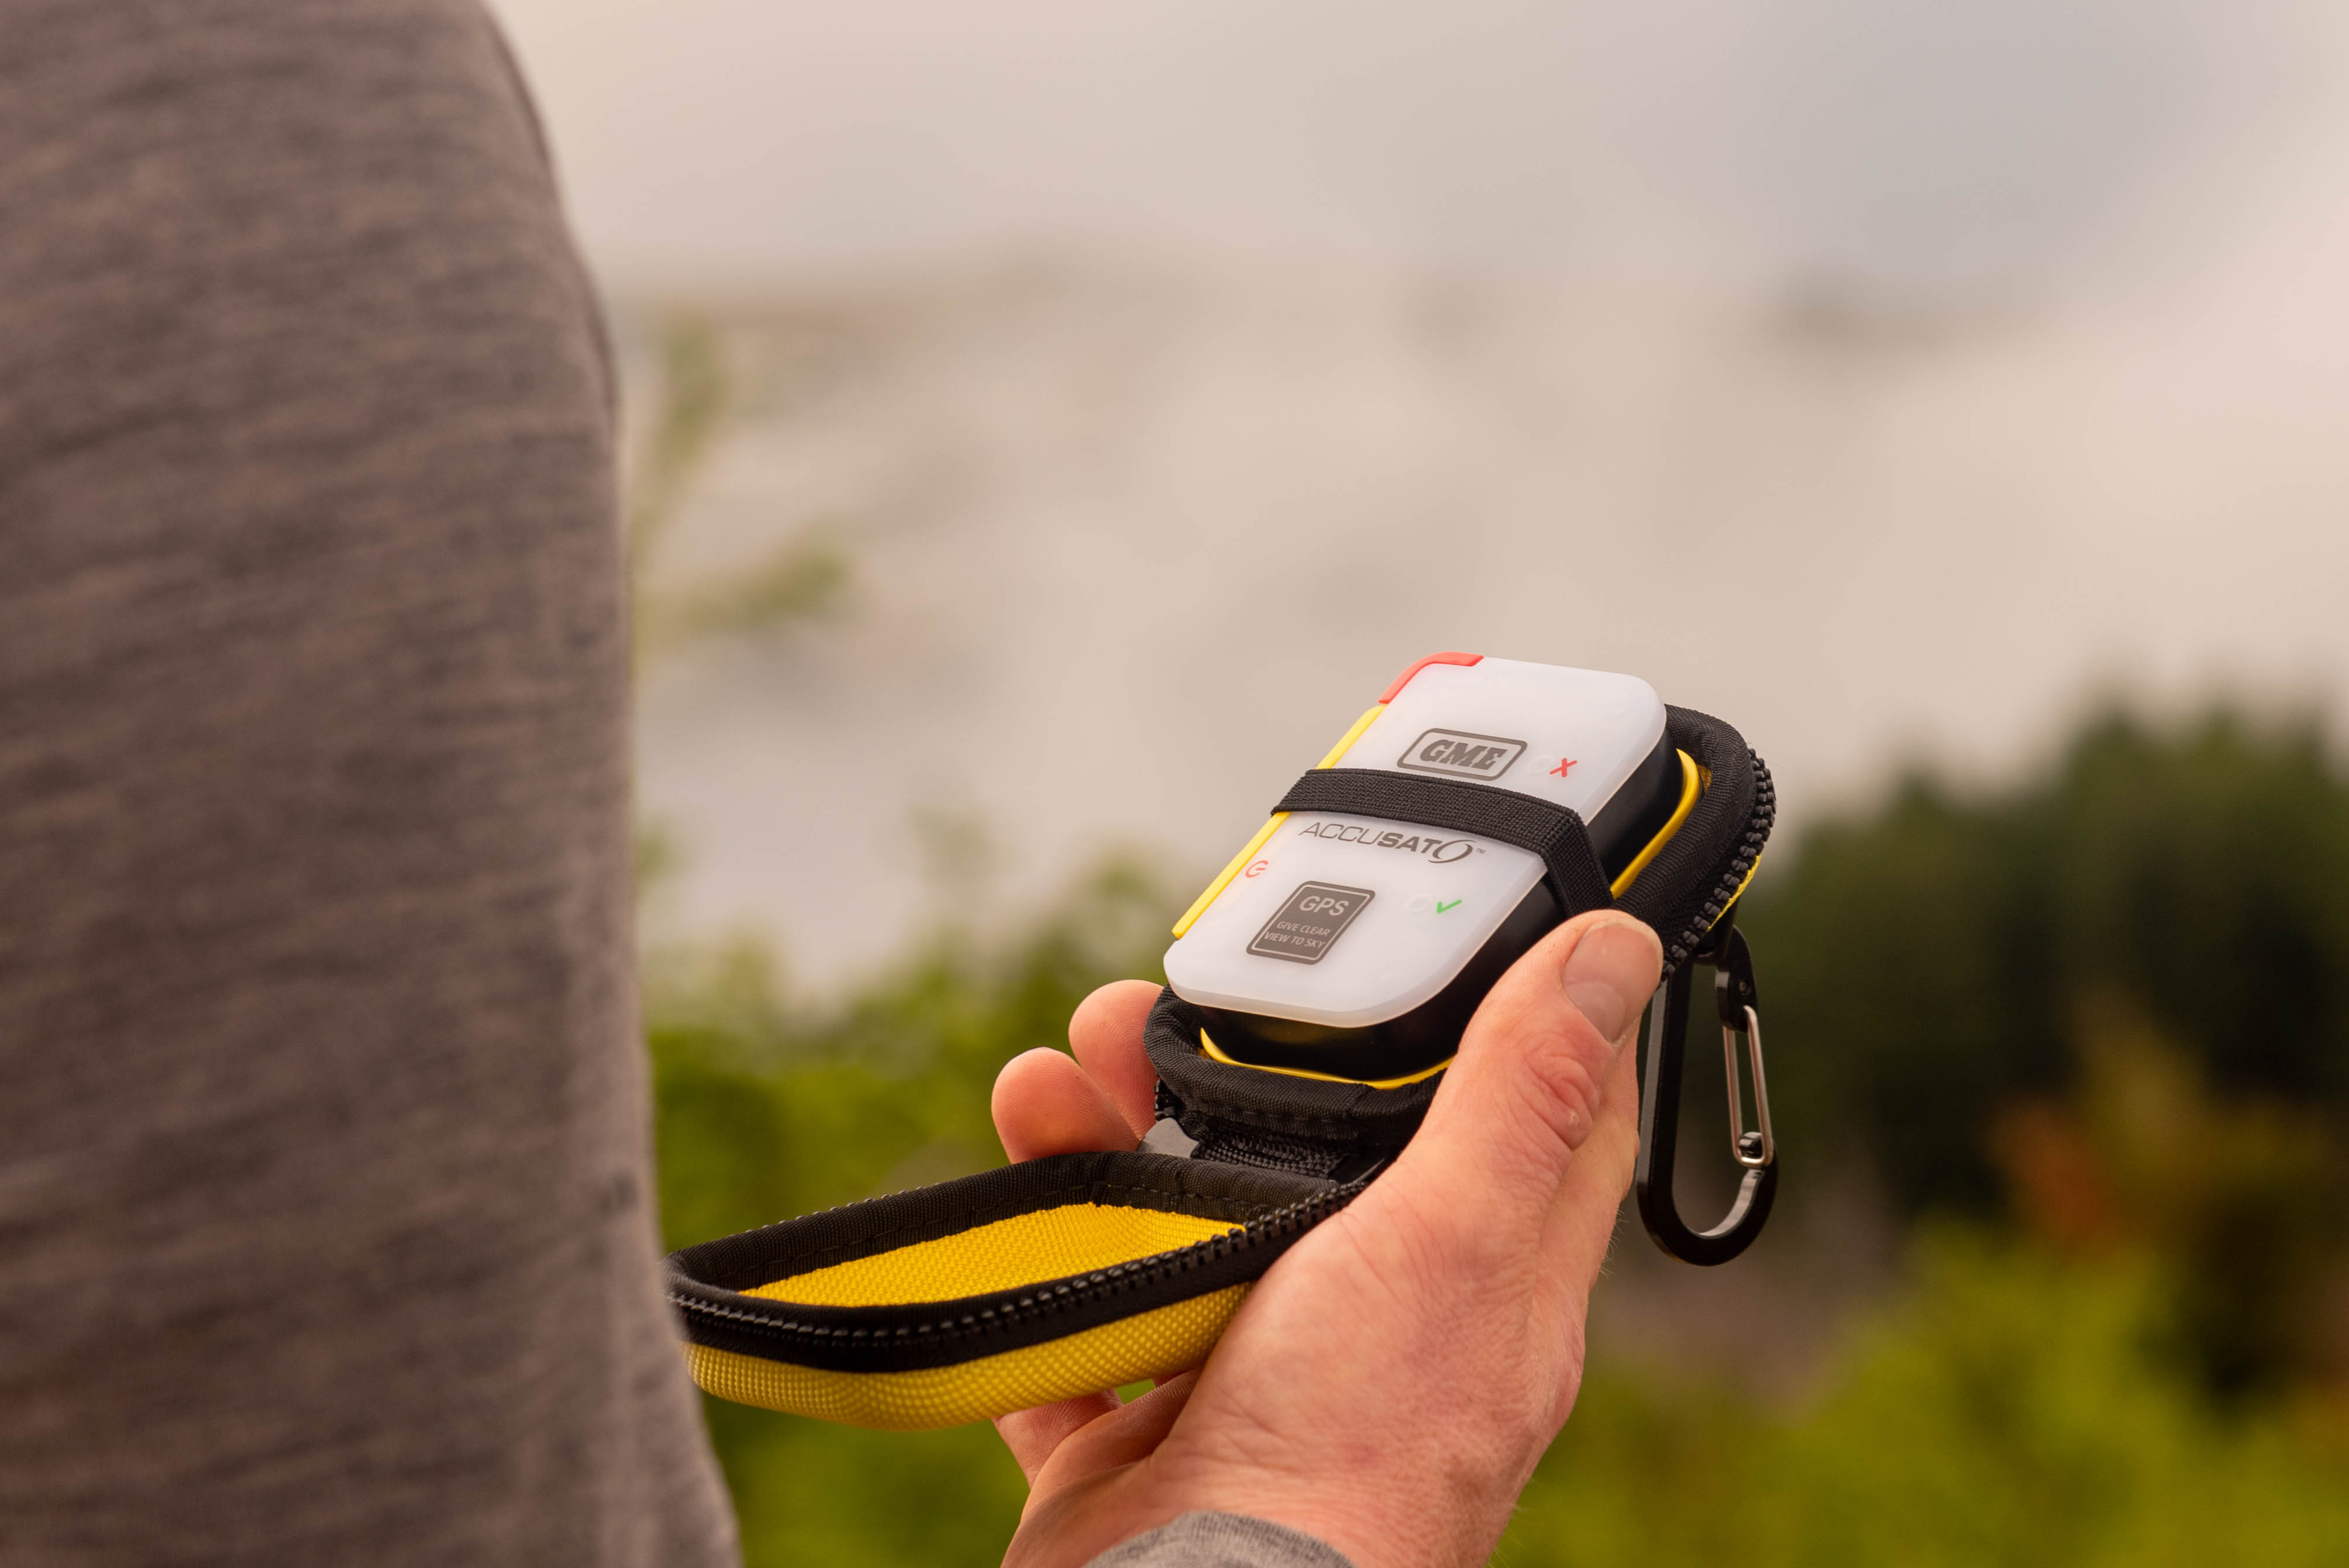 Someone holding a personal locator beacon